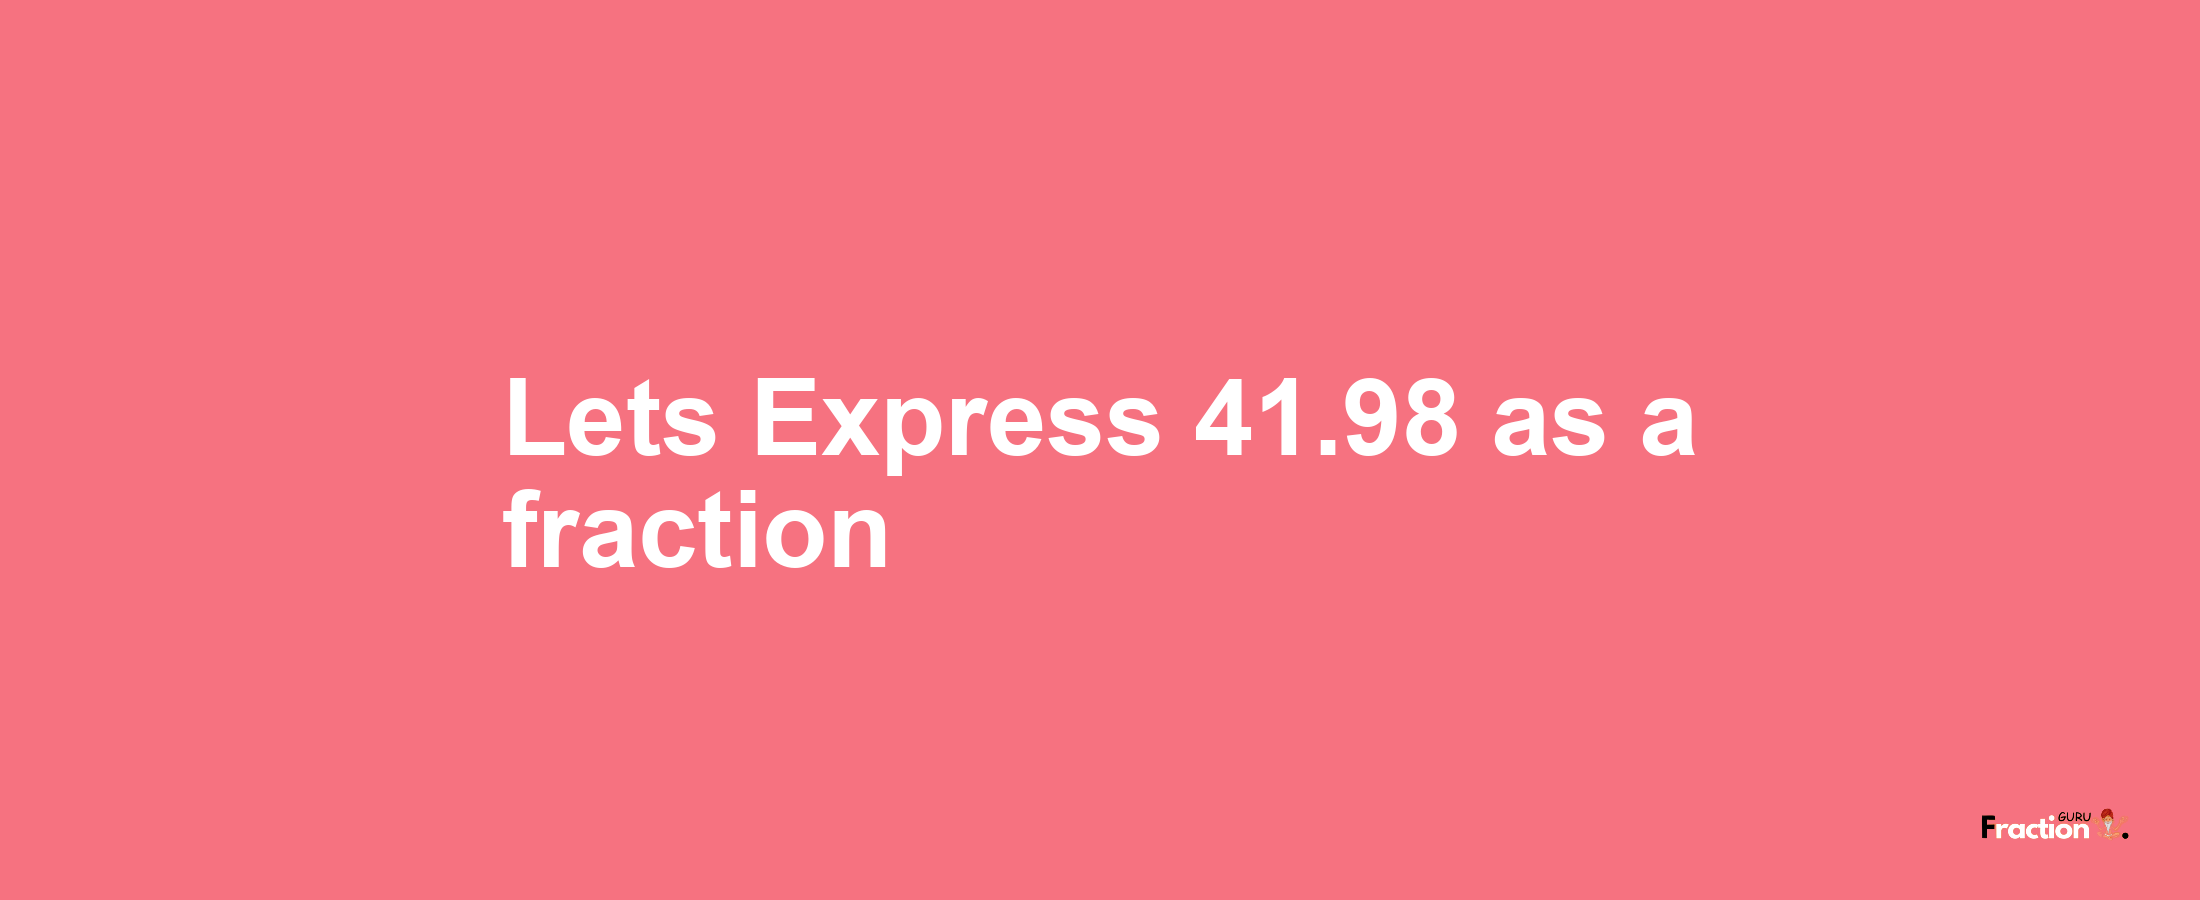 Lets Express 41.98 as afraction